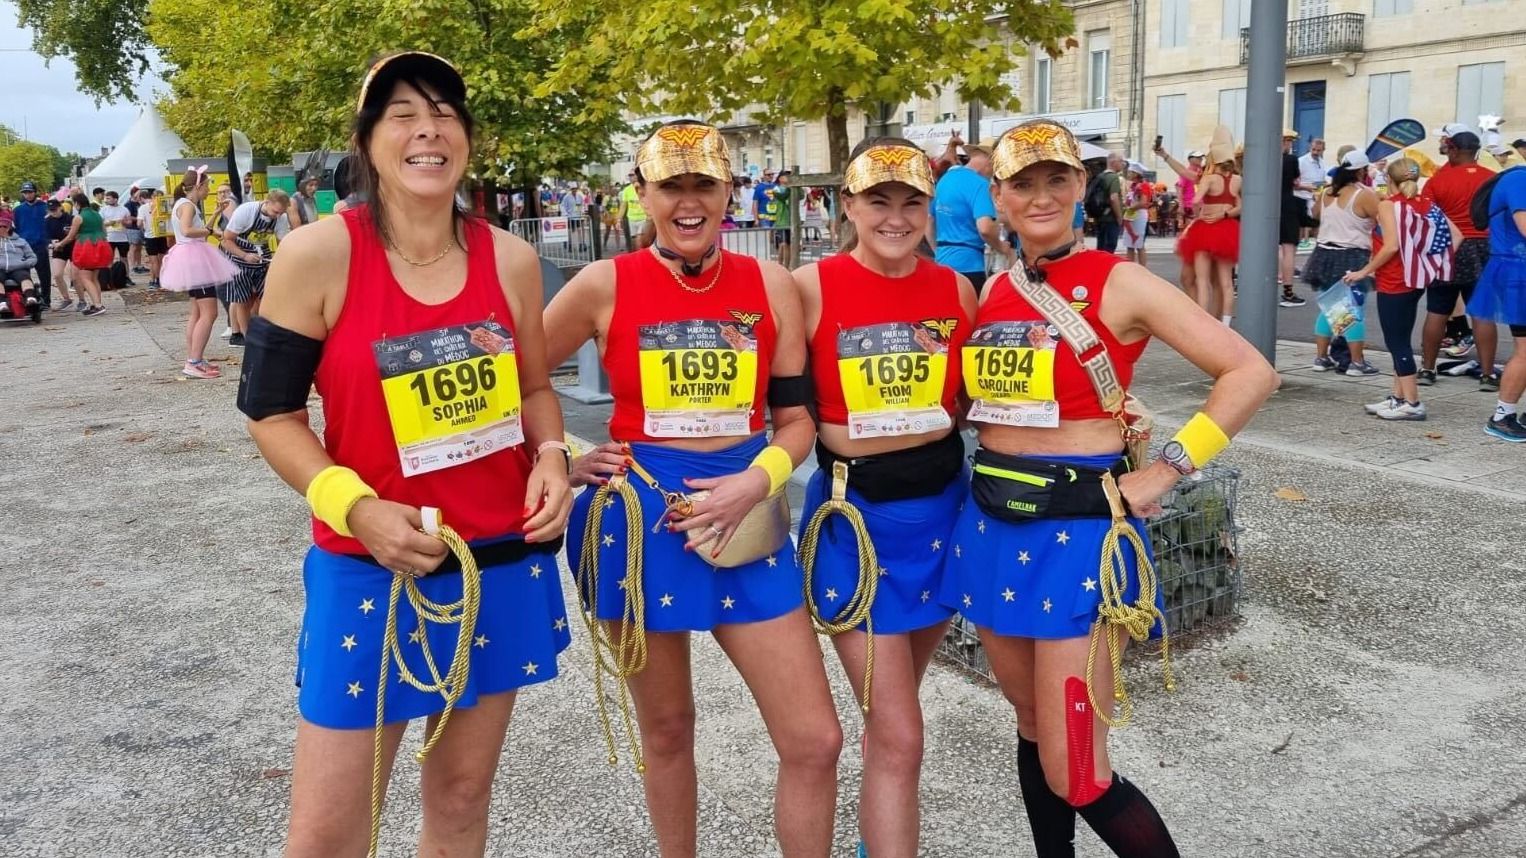 Fiona and her 3 friends in super woman costumes posing for camera at the marathon in France